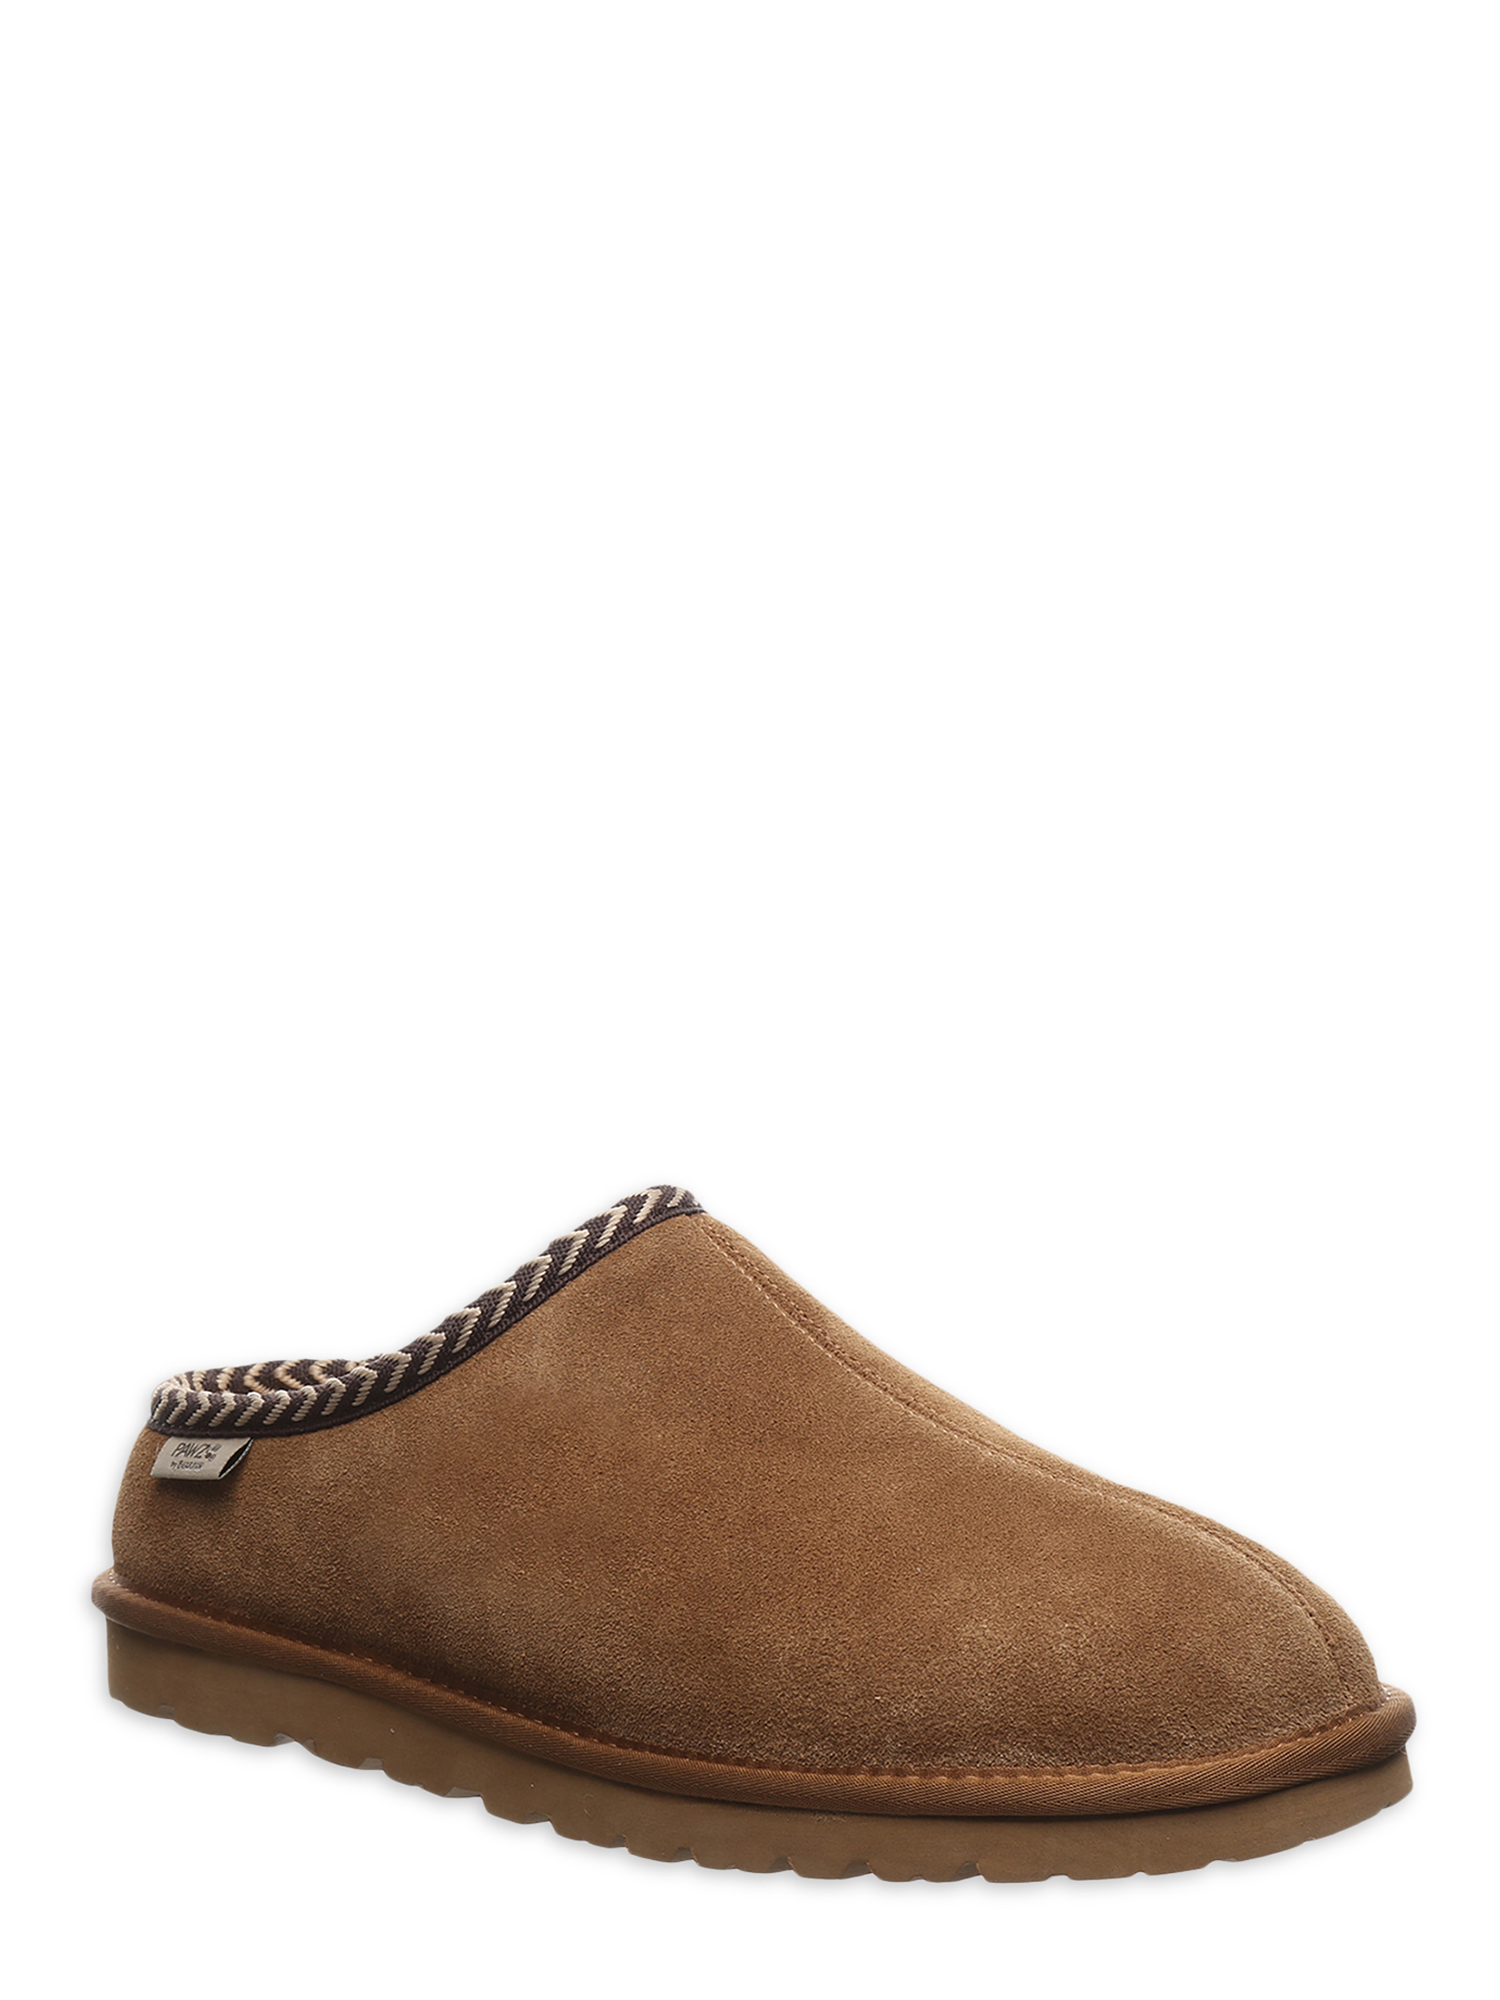 Pawz by Bearpaw Men's Genuine Suede Kevin Slipper Clogs - image 1 of 5